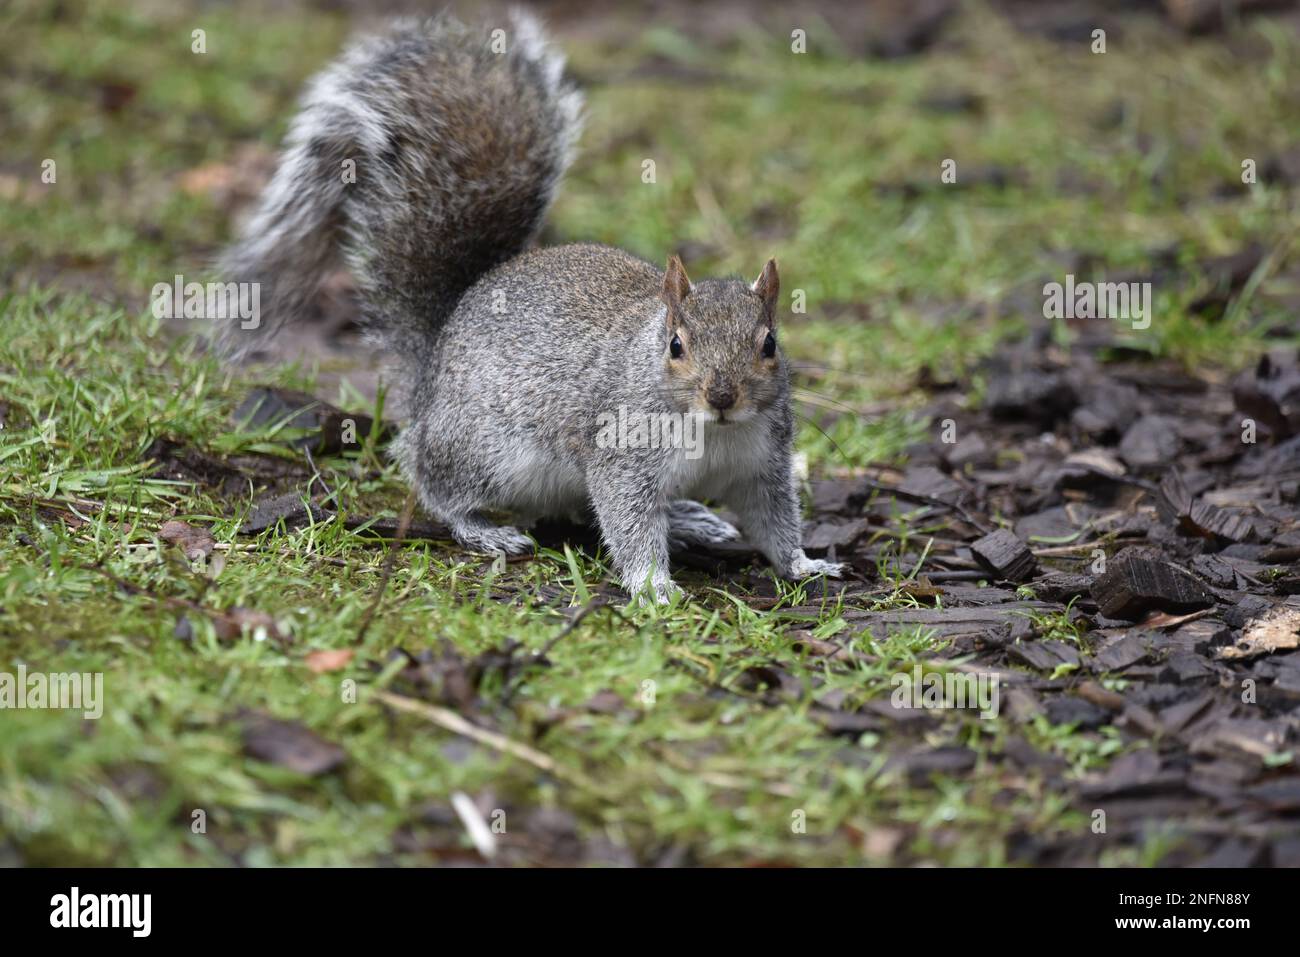 Frame Filling Image of a Grey Squirrel (Sciurus carolinensis) Facing Camera on Grass and Leaf Litter Ground, Tail Up, taken in the UK in January Stock Photo